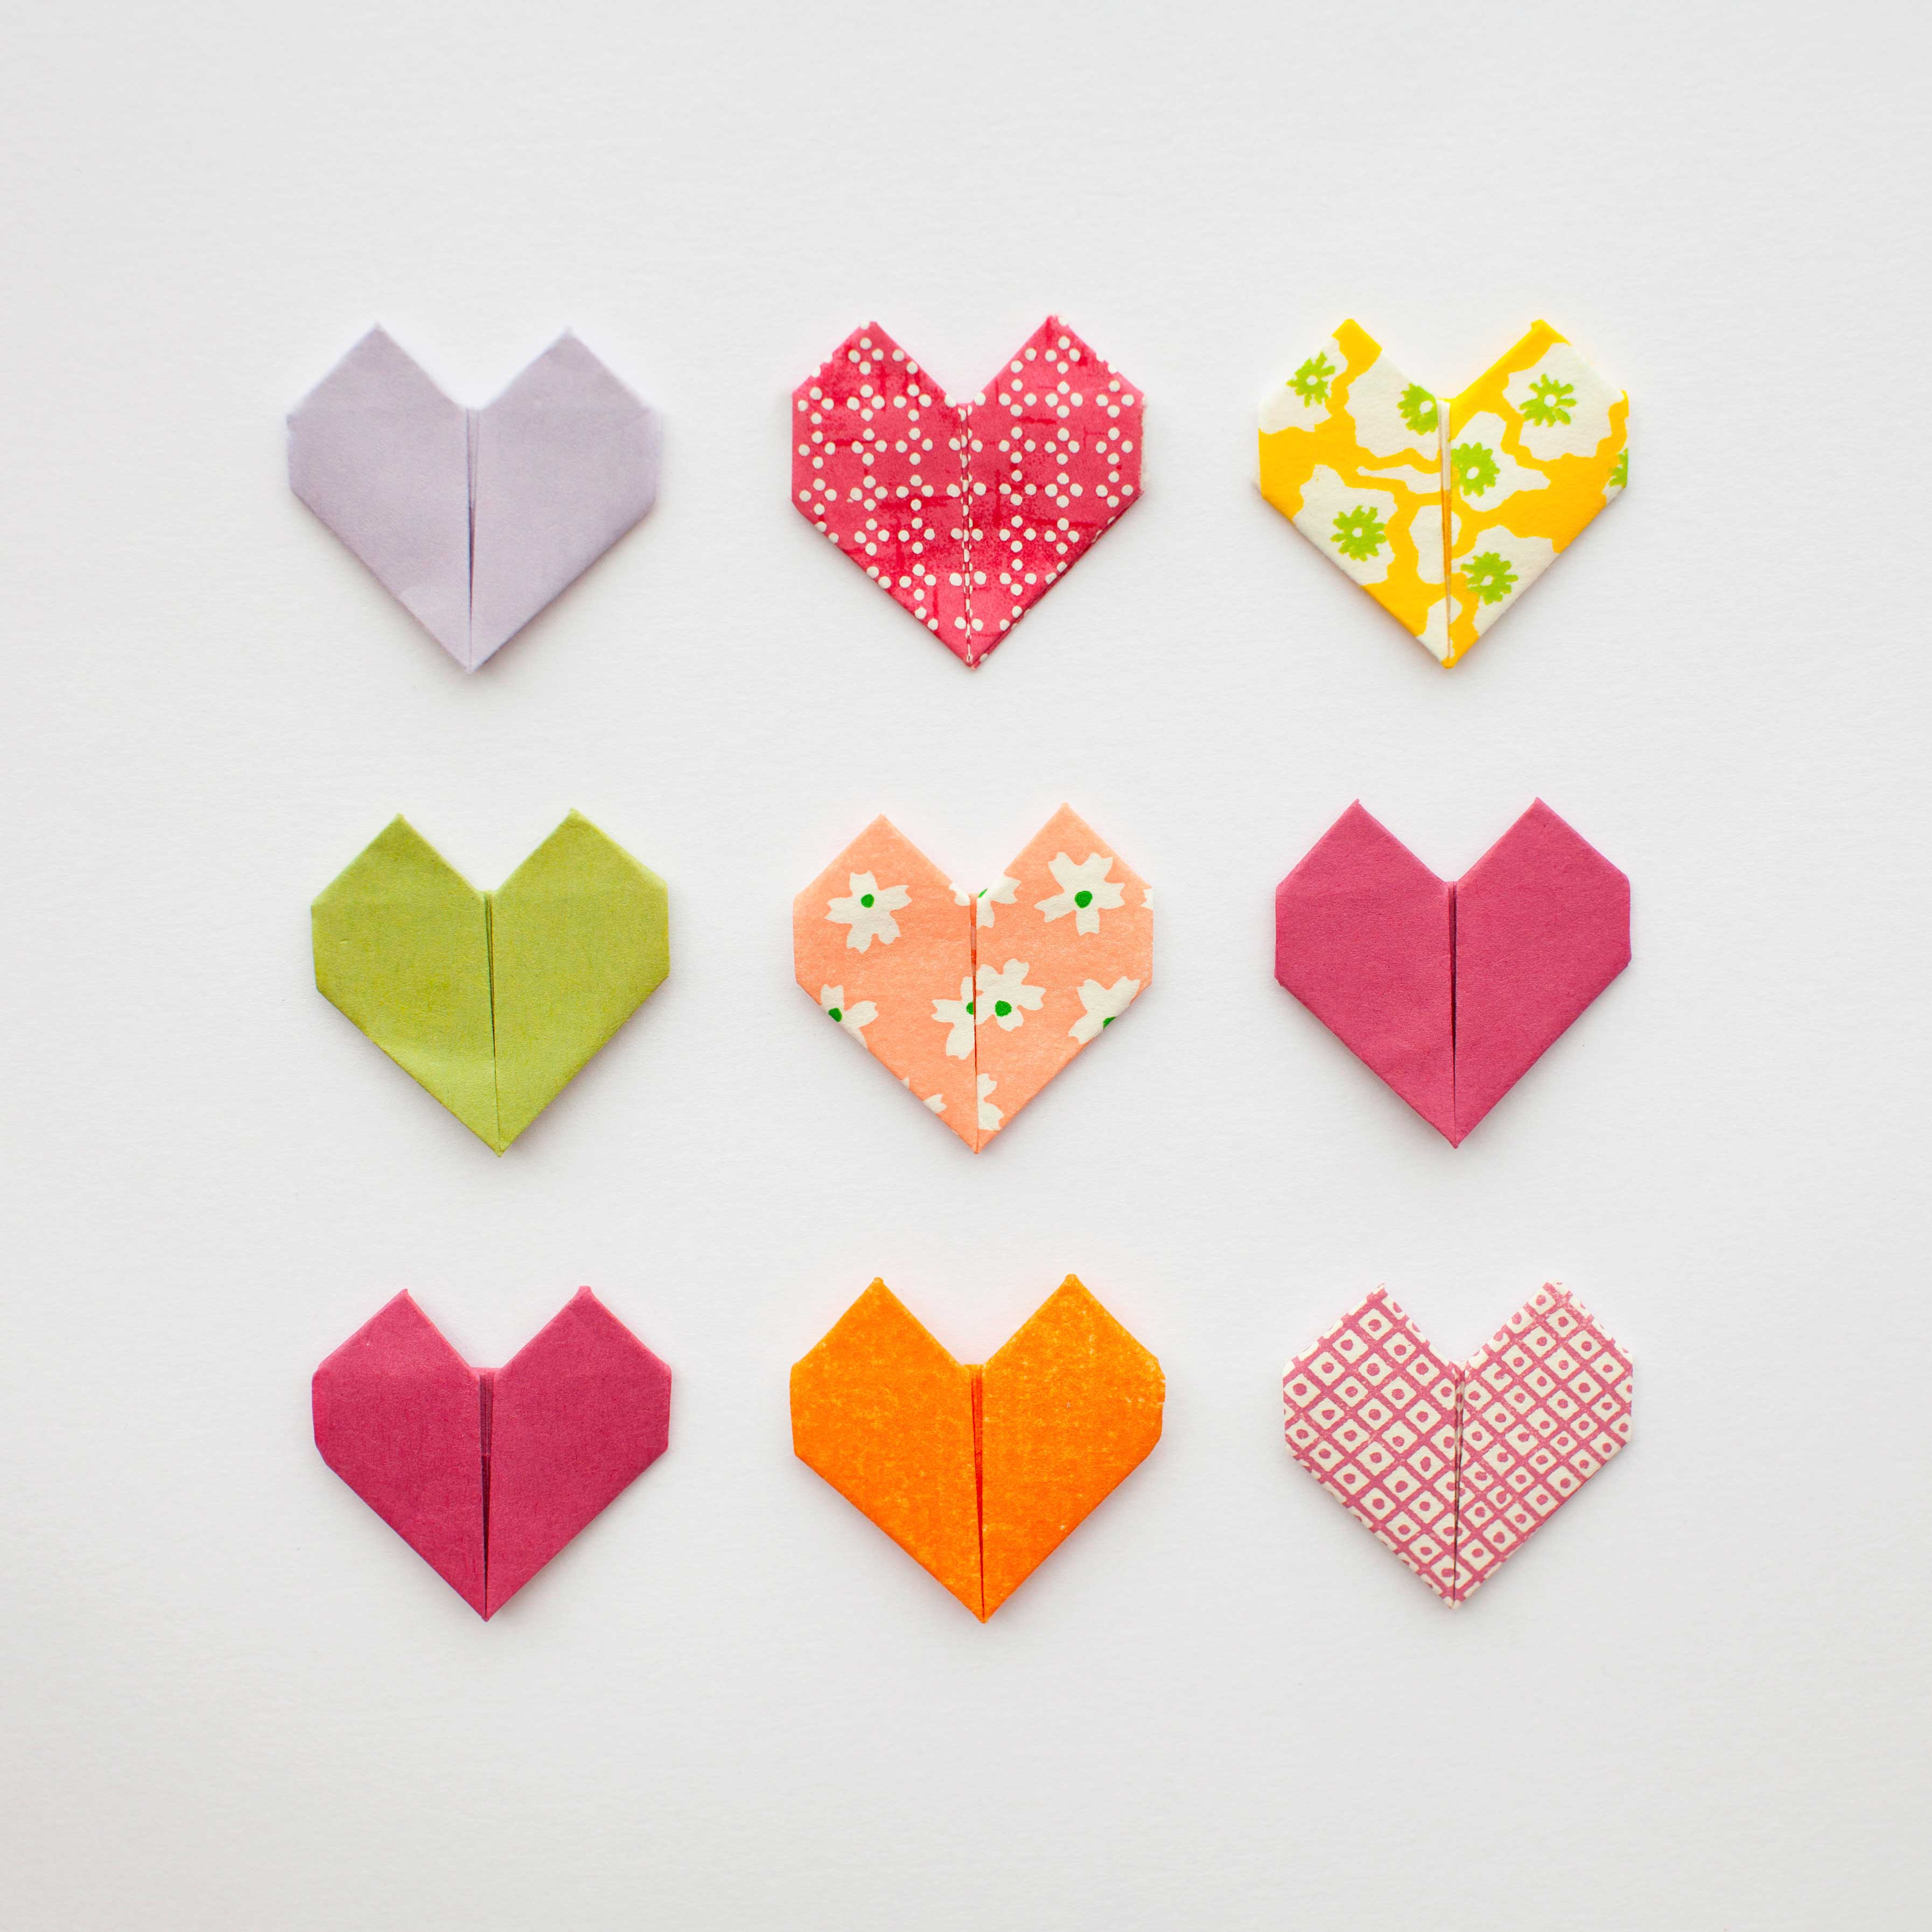 How To Make An Origami Heart Diy Origami Hearts For Valentines Day Paperlust